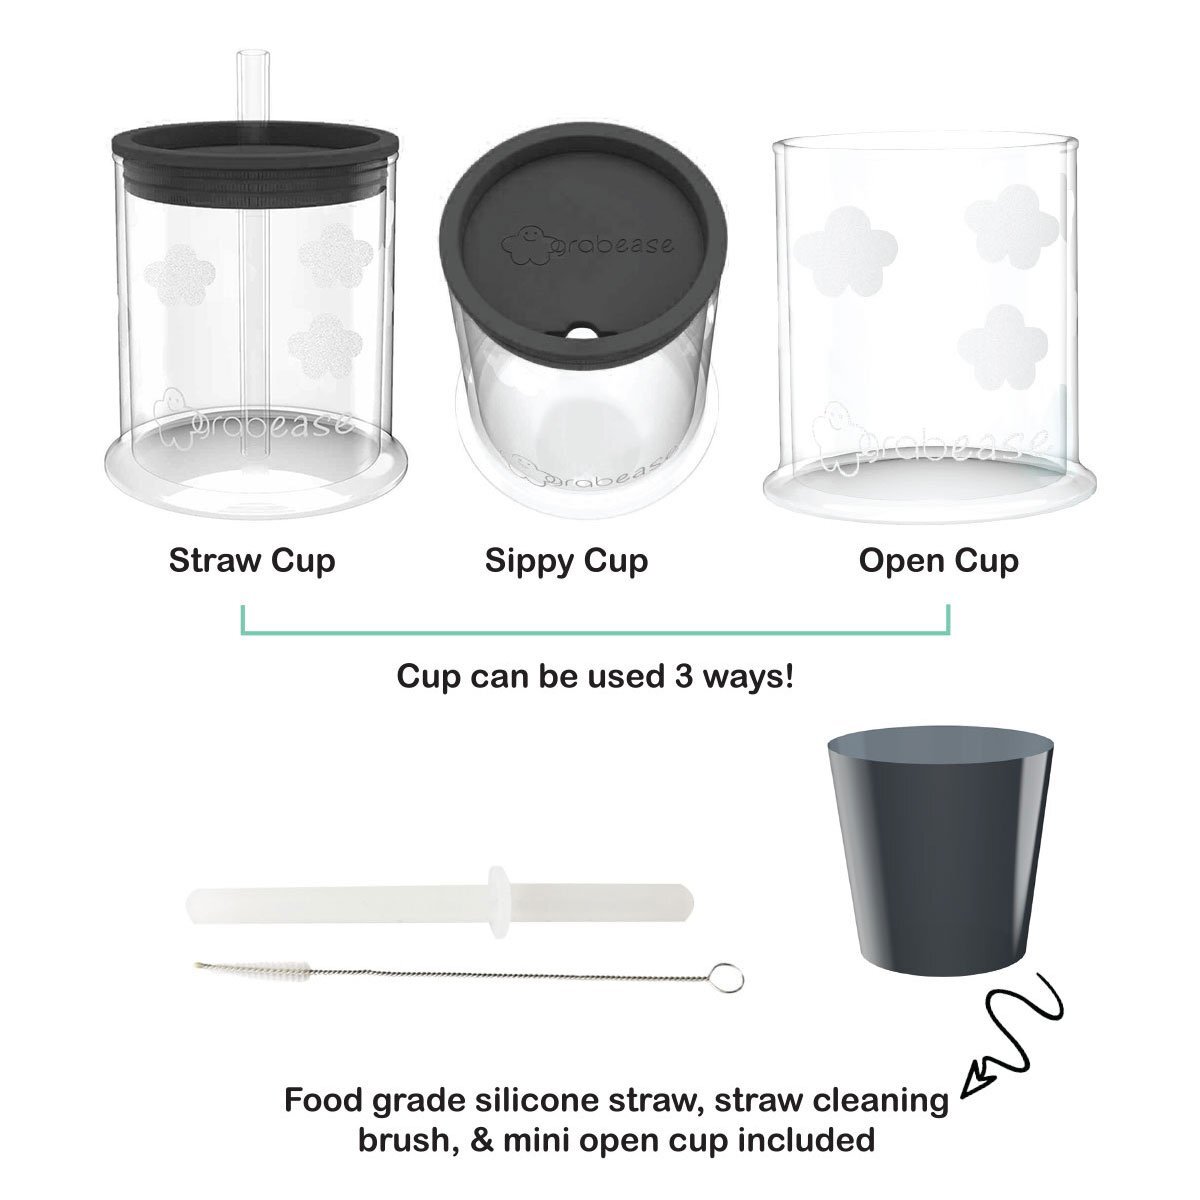 Re Play 10 Oz. No Spill Cups with Convertible Straw Lids, Made in USA, One Piece Silicone Valve and Bendy Straws, BPA Free